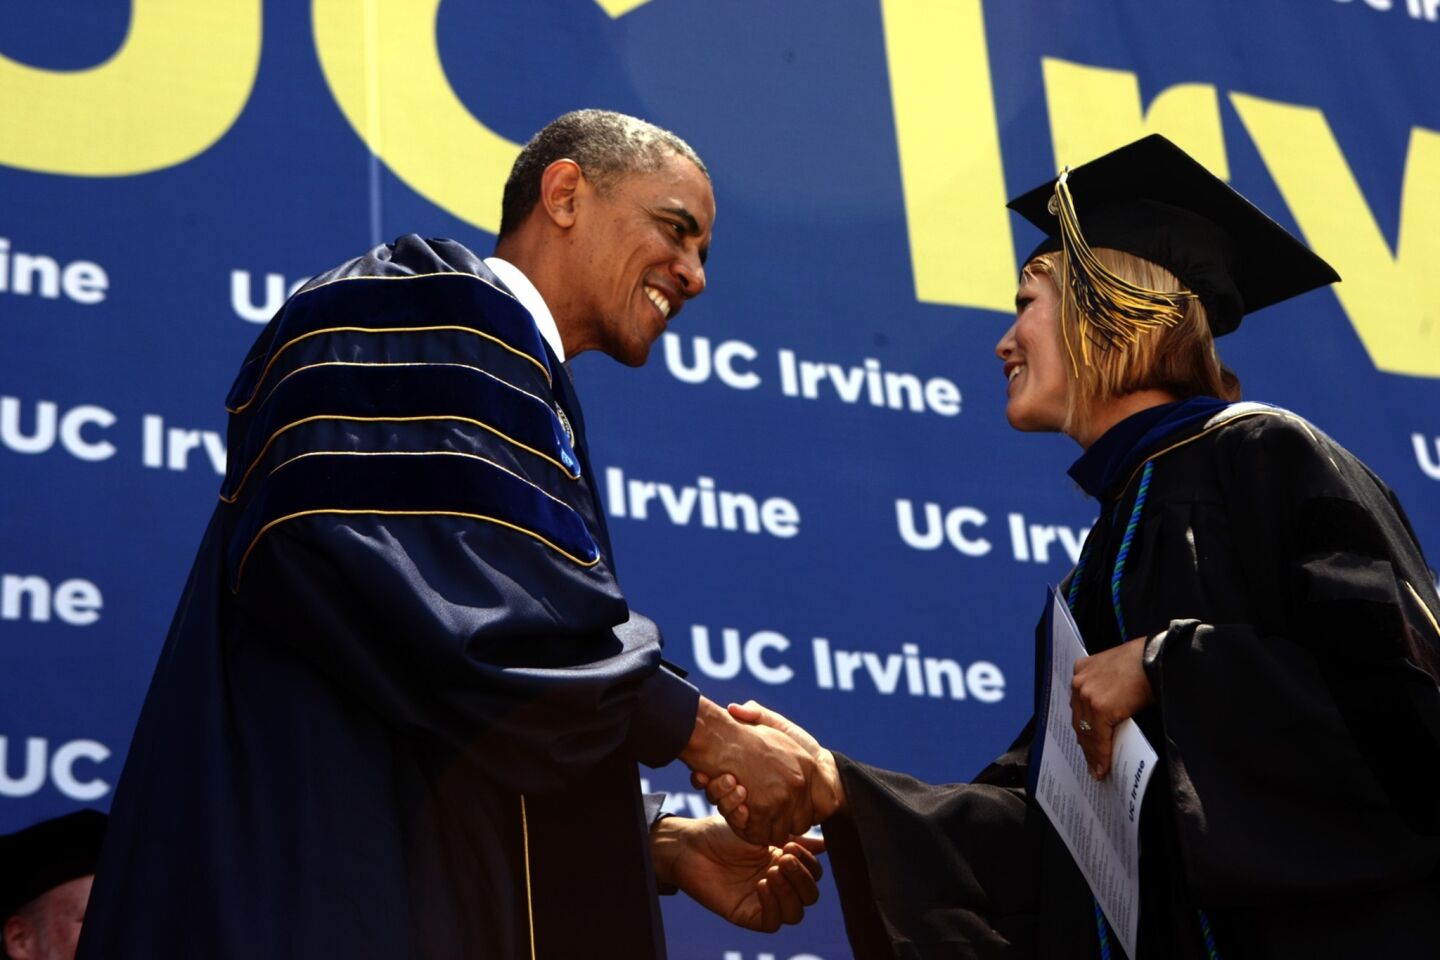 Obama gets standing ovations at UC Irvine commencement Los Angeles Times